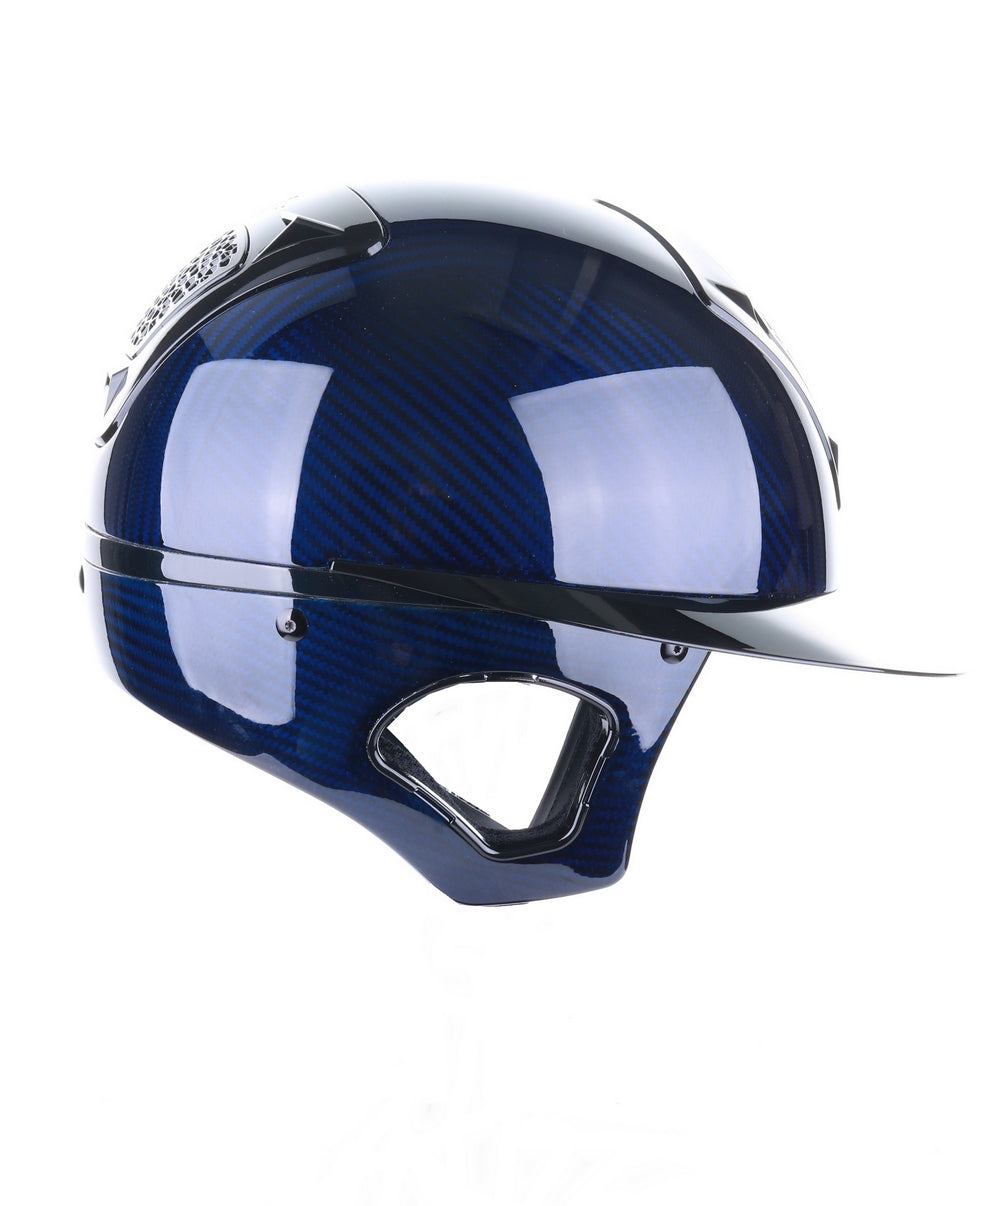 Freejump Helmet Voronoï with Temple Protection Carbon Gloss Navy